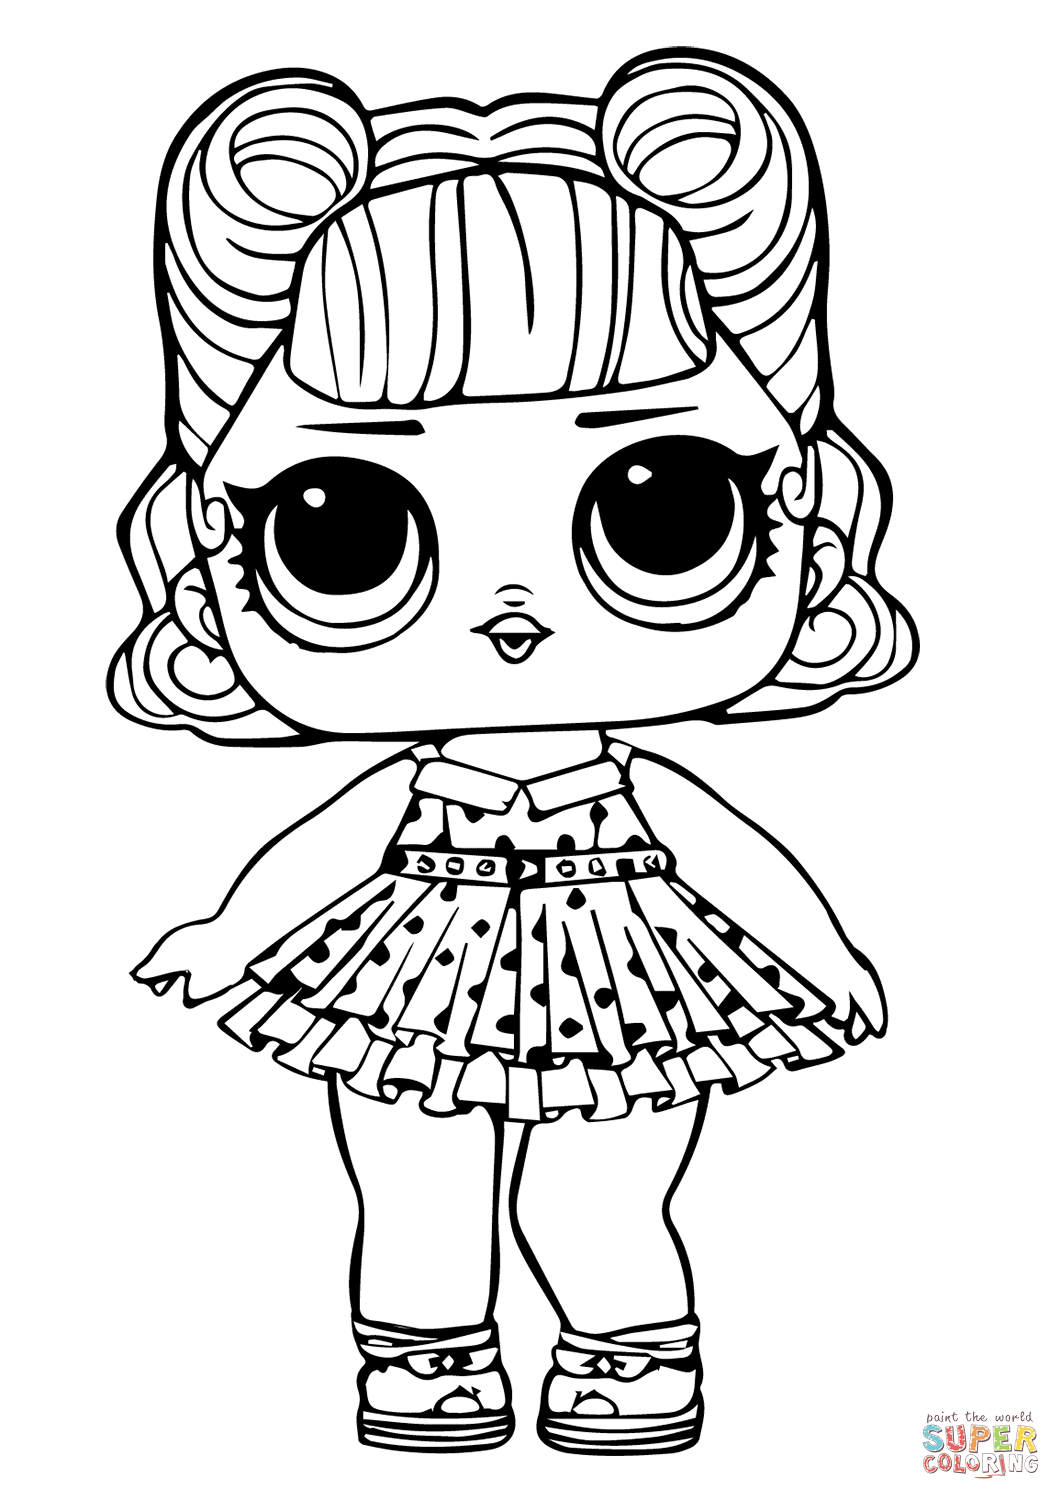 LOL Doll Jitterbug coloring page | Free Printable Coloring Pages